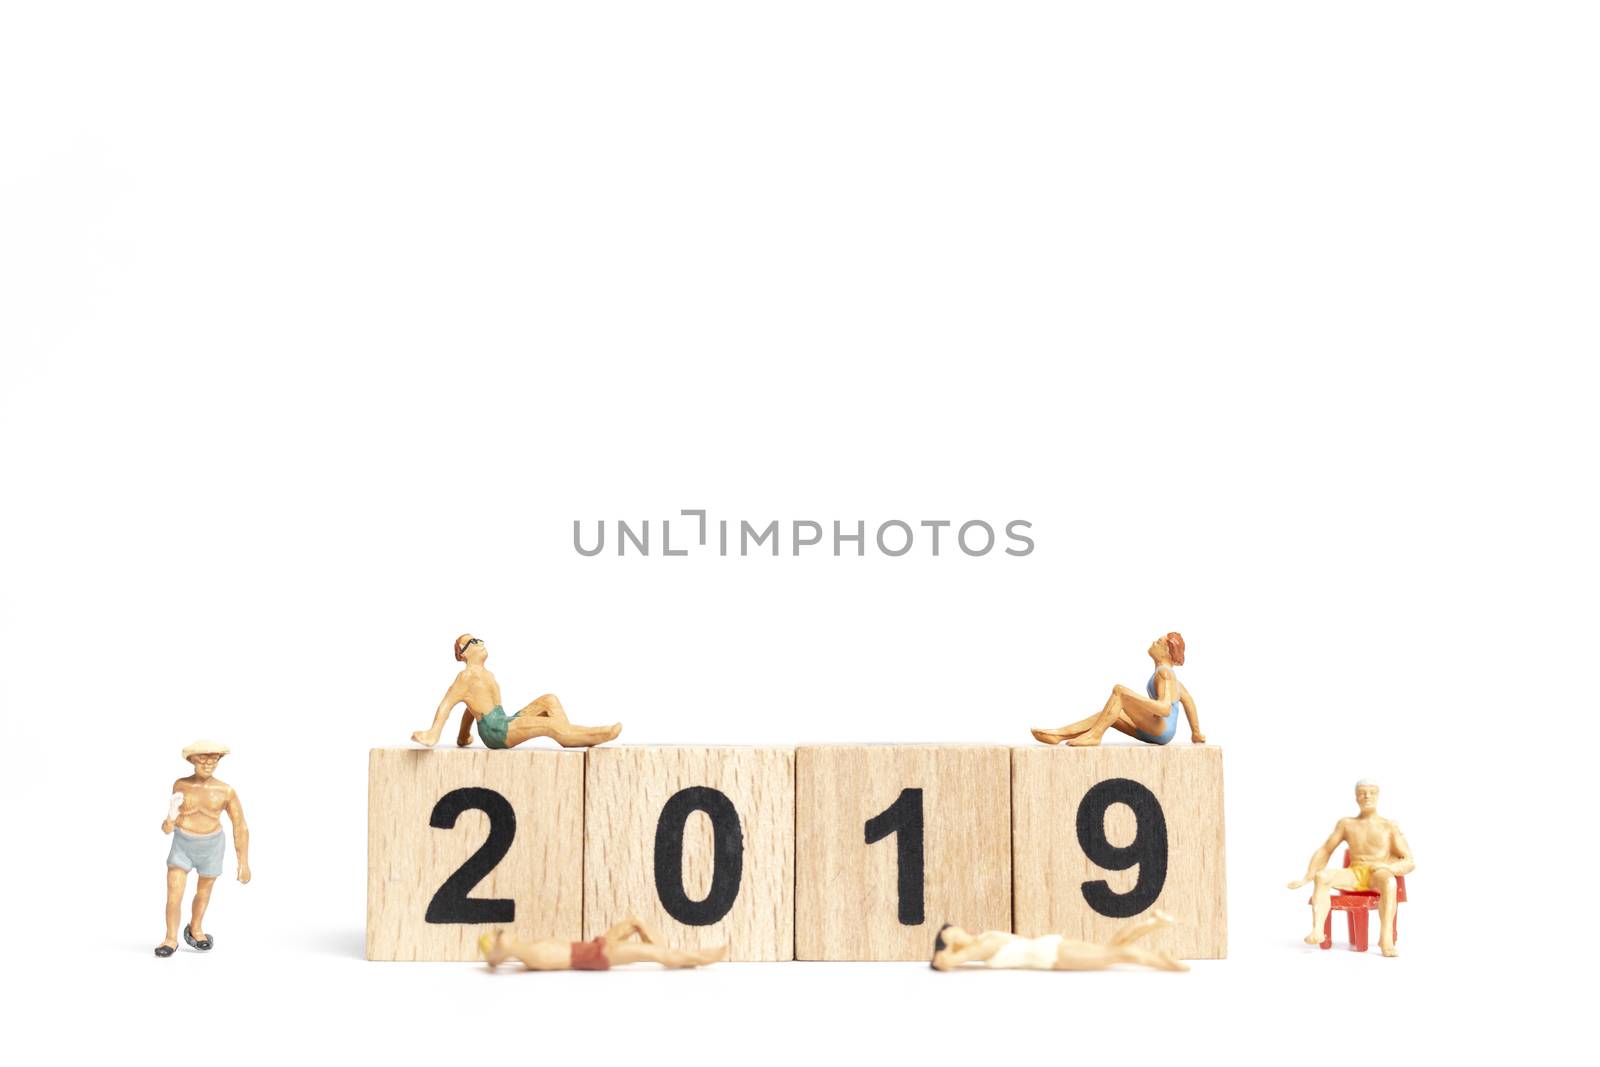 Miniature people wearing swimsuit relaxing on wooden block 2019 with white background